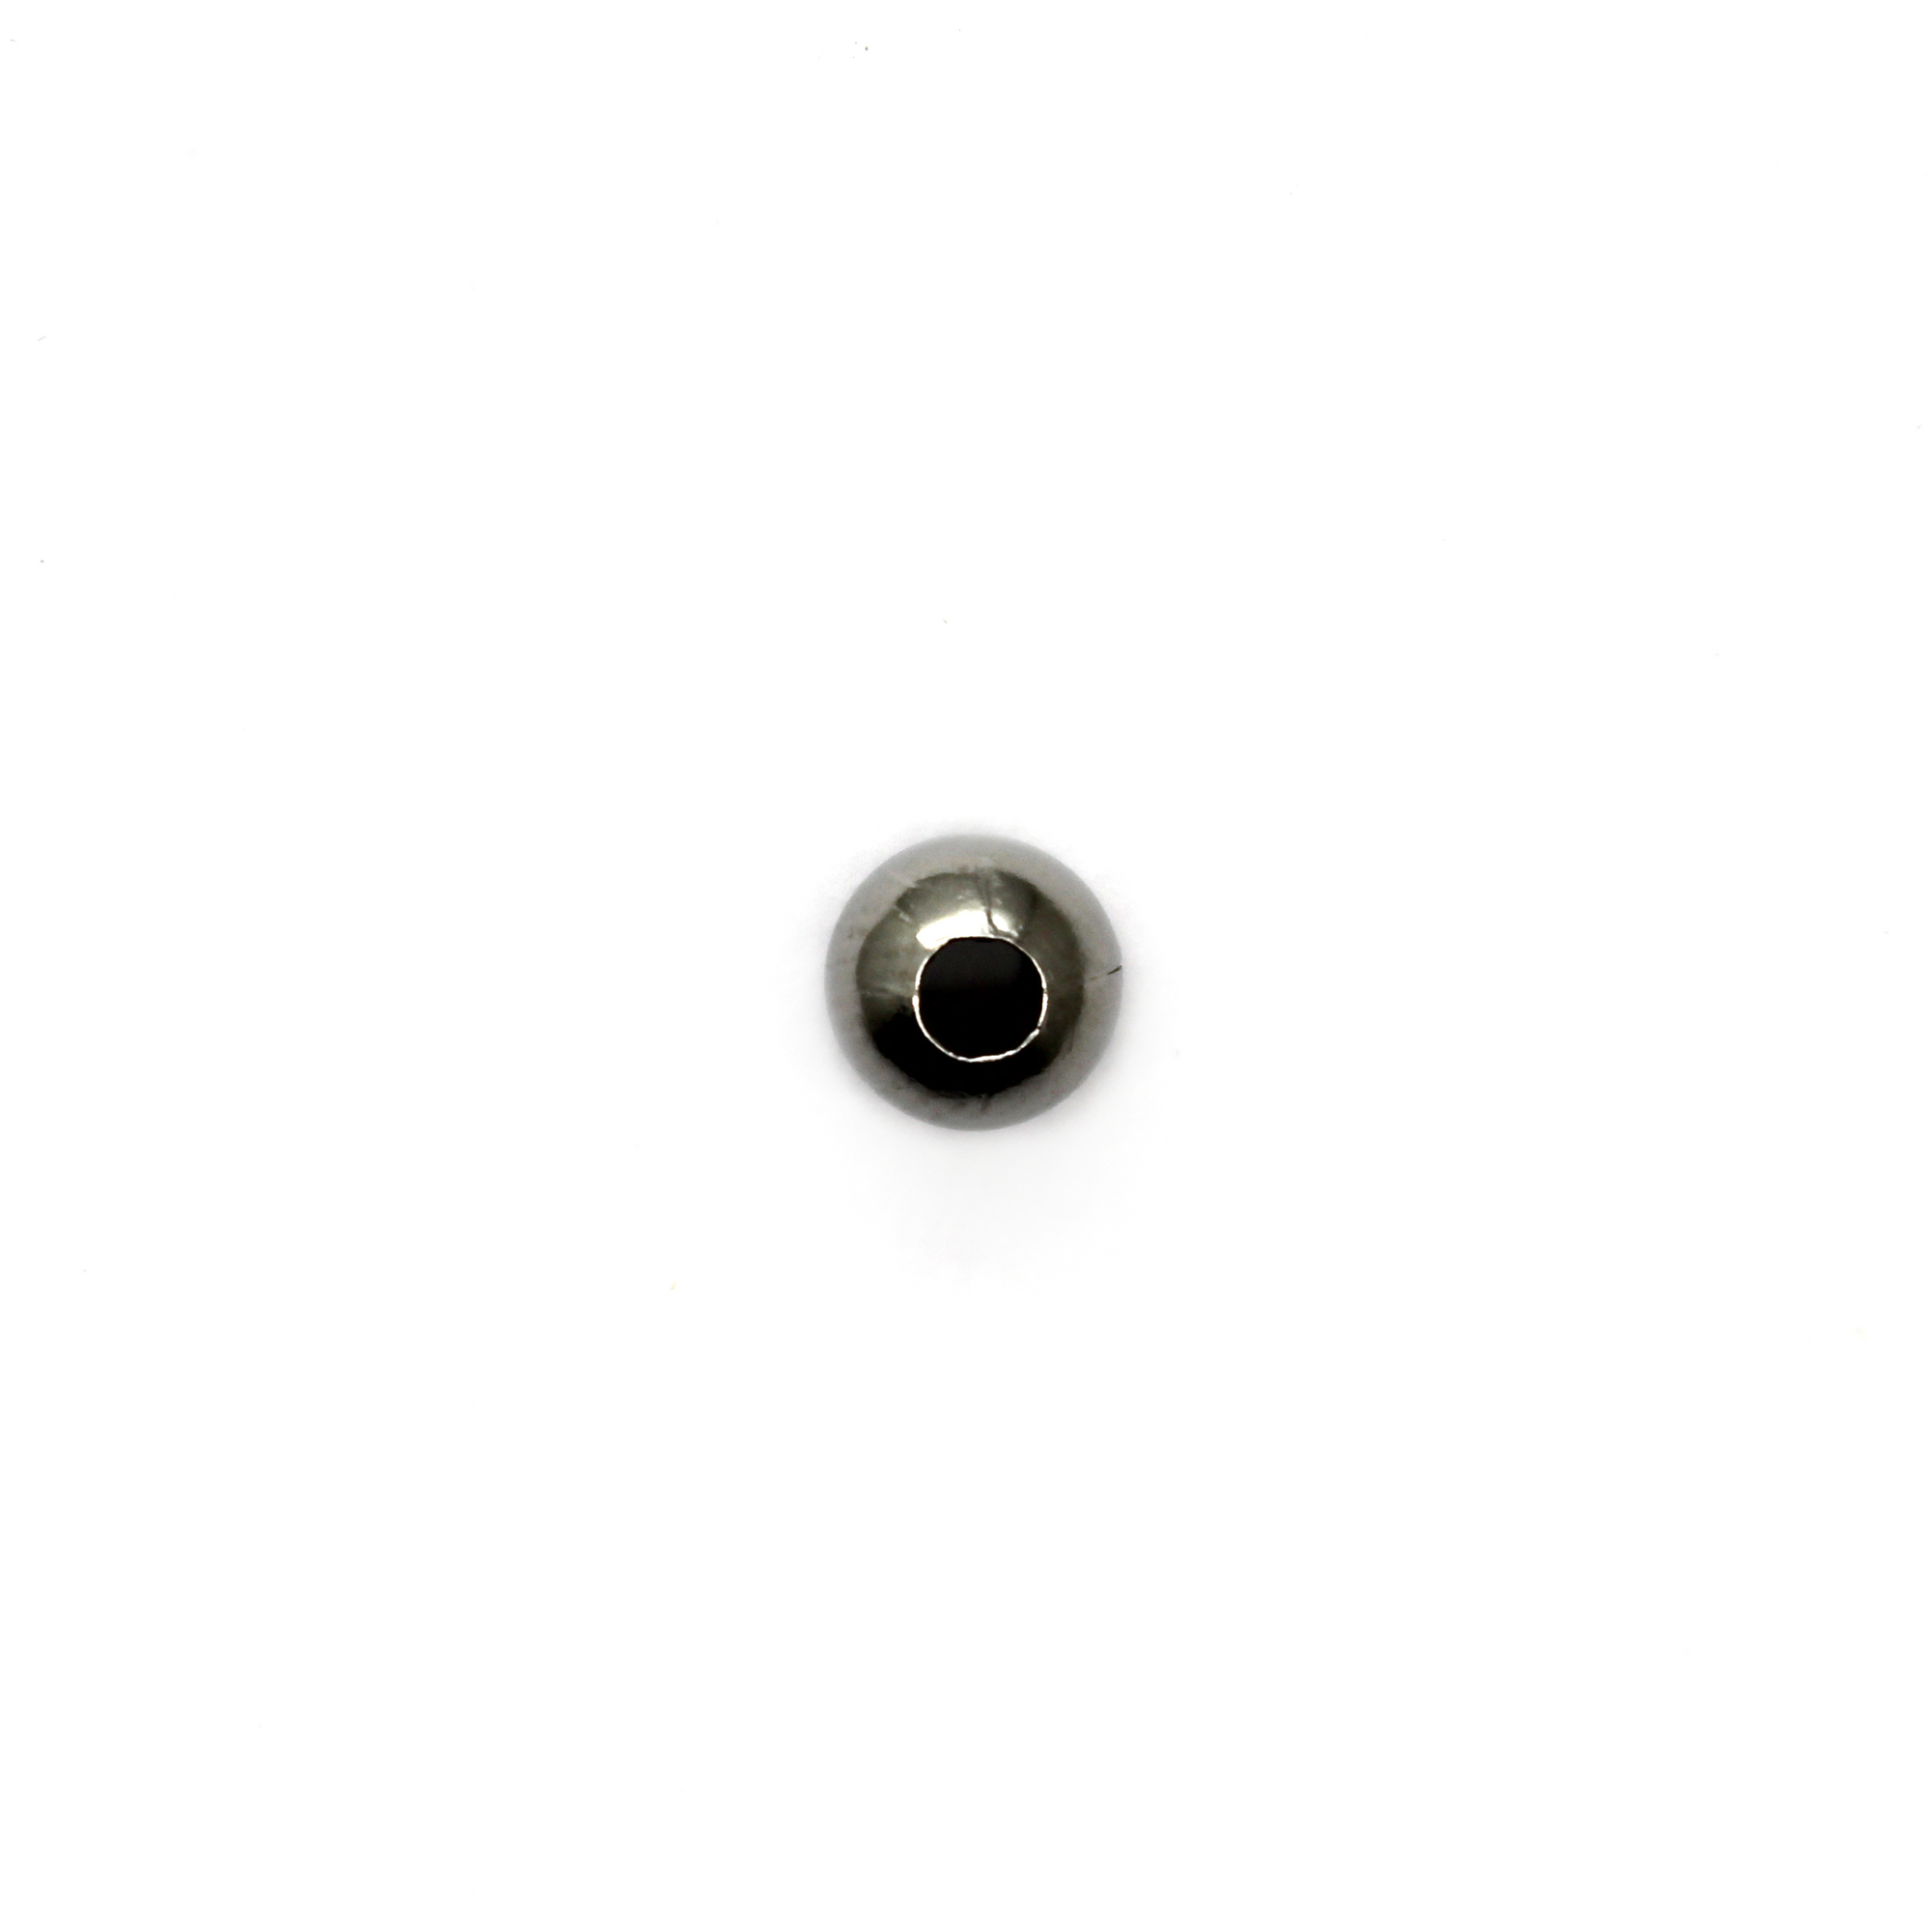 Spacers, Plain Ball Spacer, Stainless Steel, Silver, 6mm X 5mm X 2mm (hole), Sold Per pkg of 30